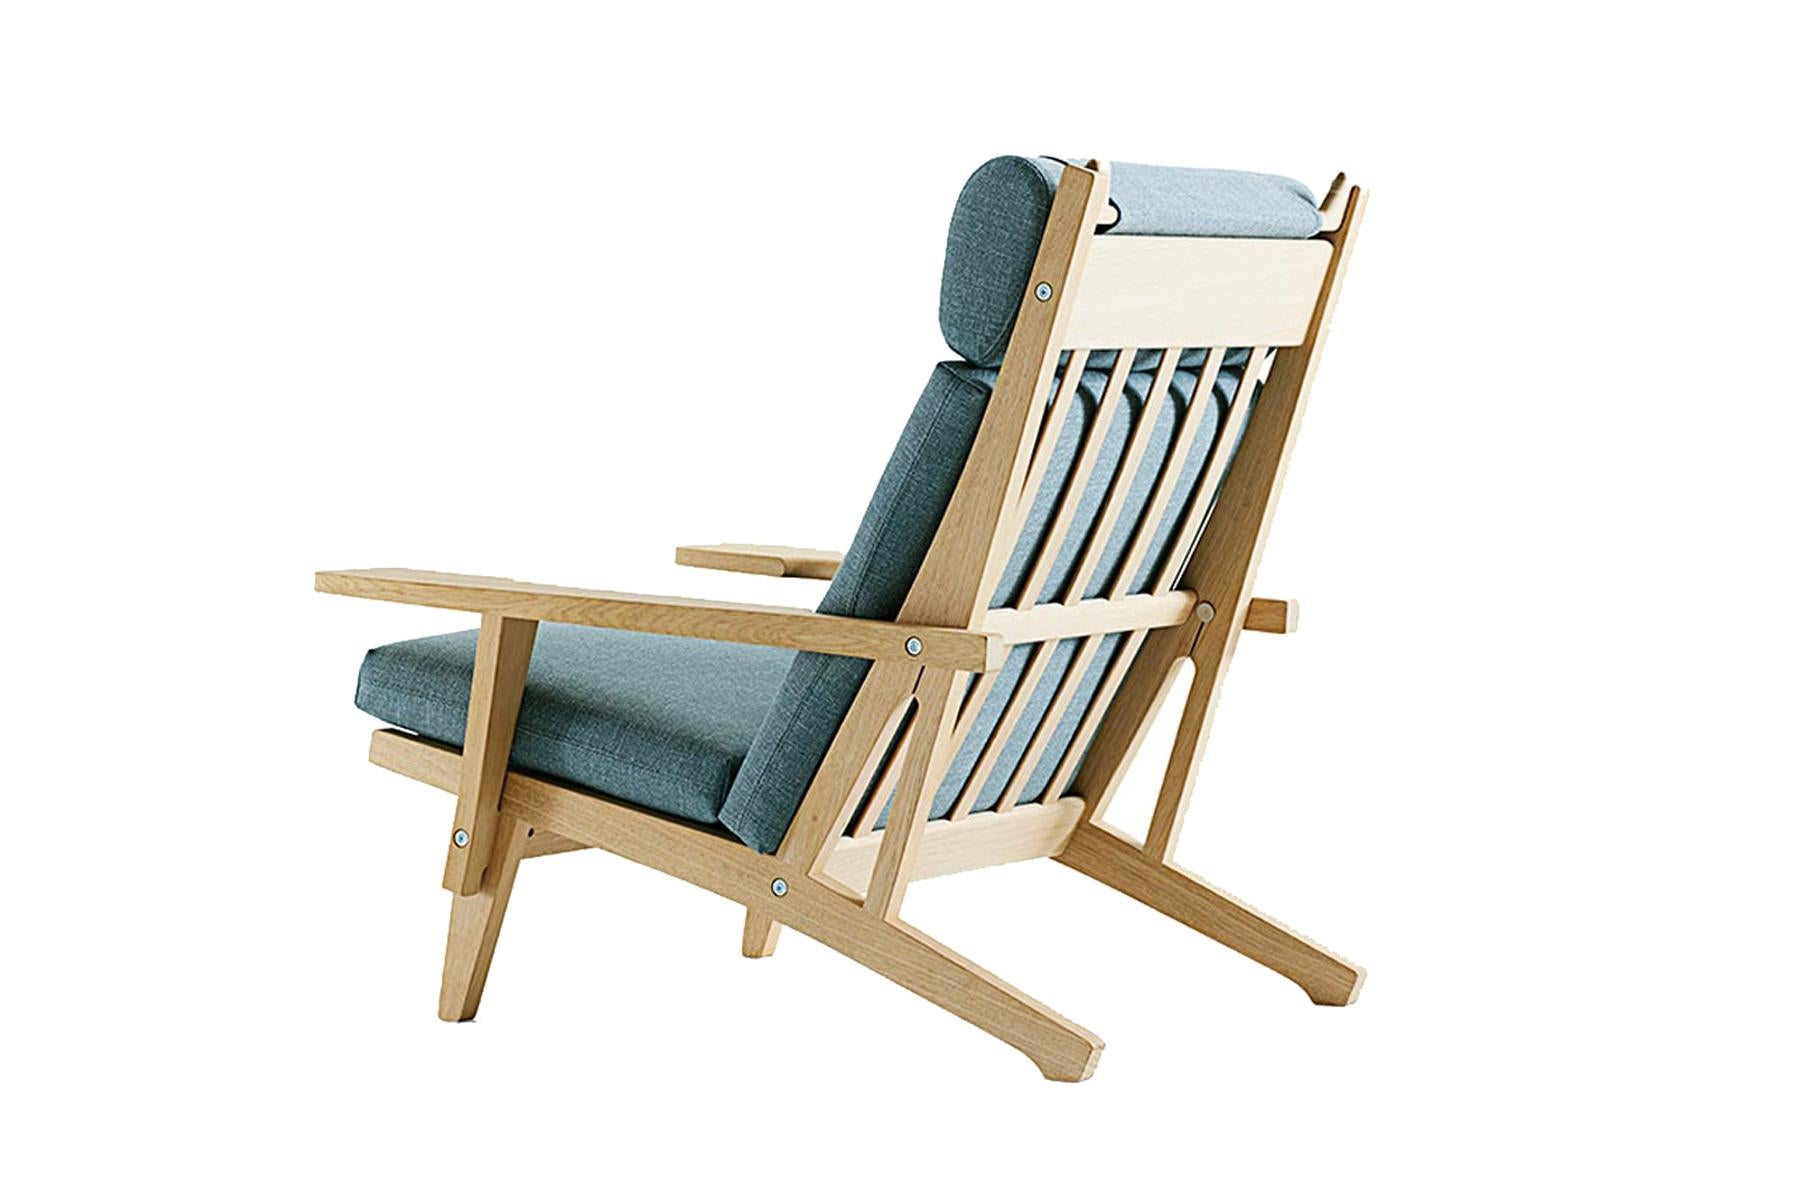 Hans Wegner GE-375 Lounge Chair with Arms, Lacquered Oak In Excellent Condition For Sale In Berkeley, CA